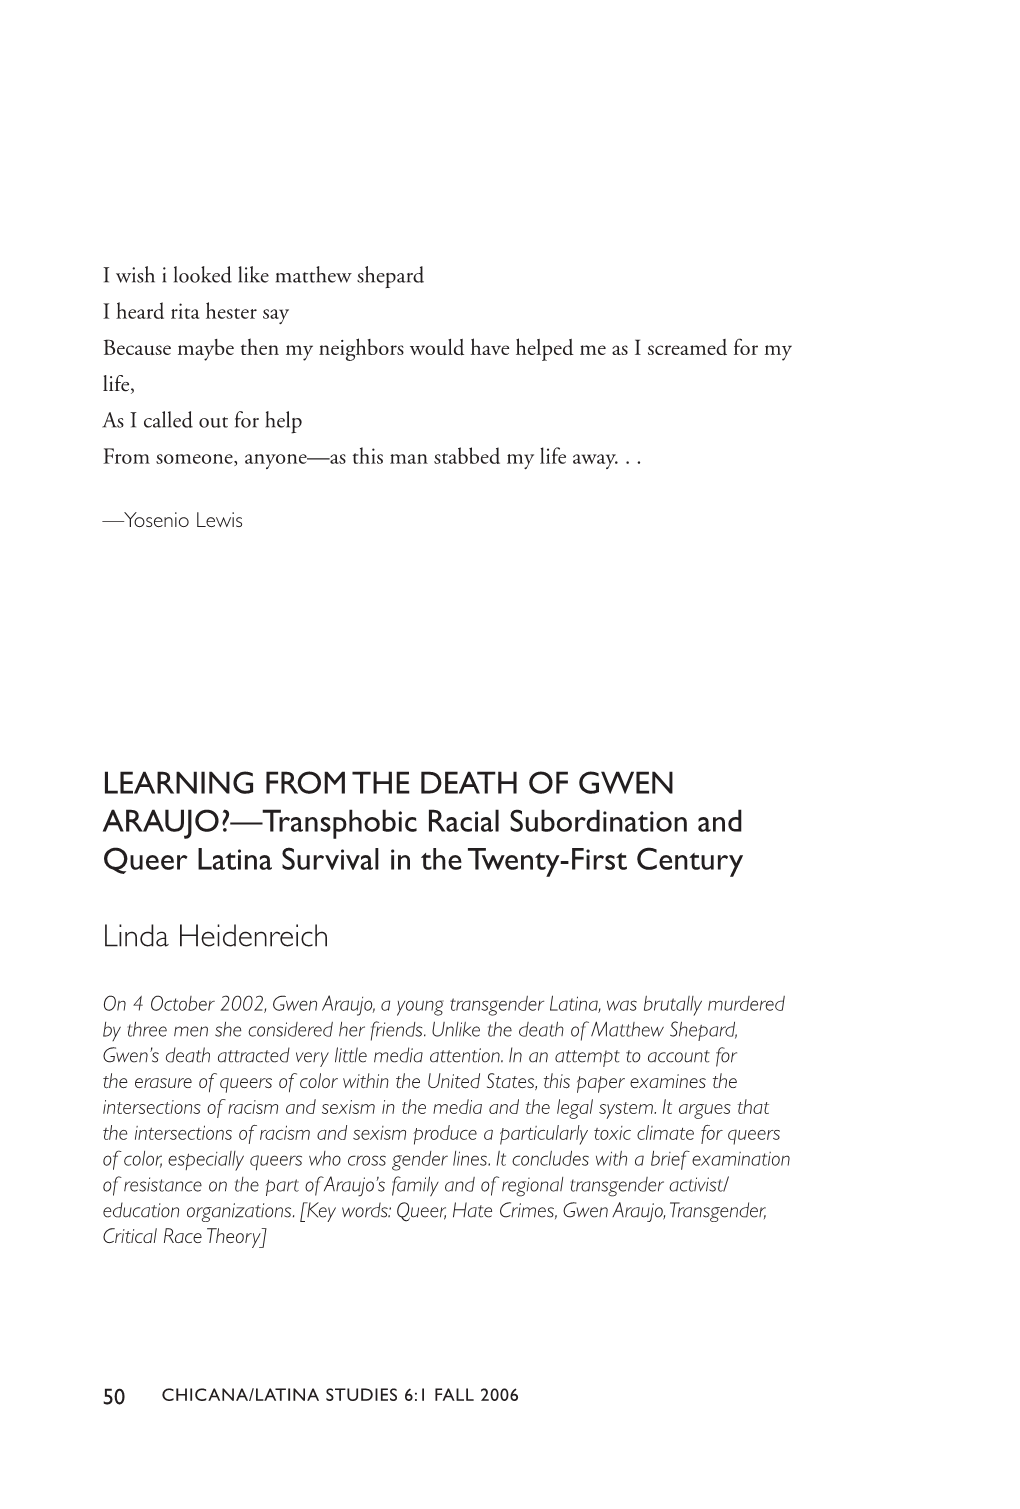 Learning from the Death of Gwen Araujo?—Transphobic Racial Subordination and Queer Latina Survival in the Twenty-First Century